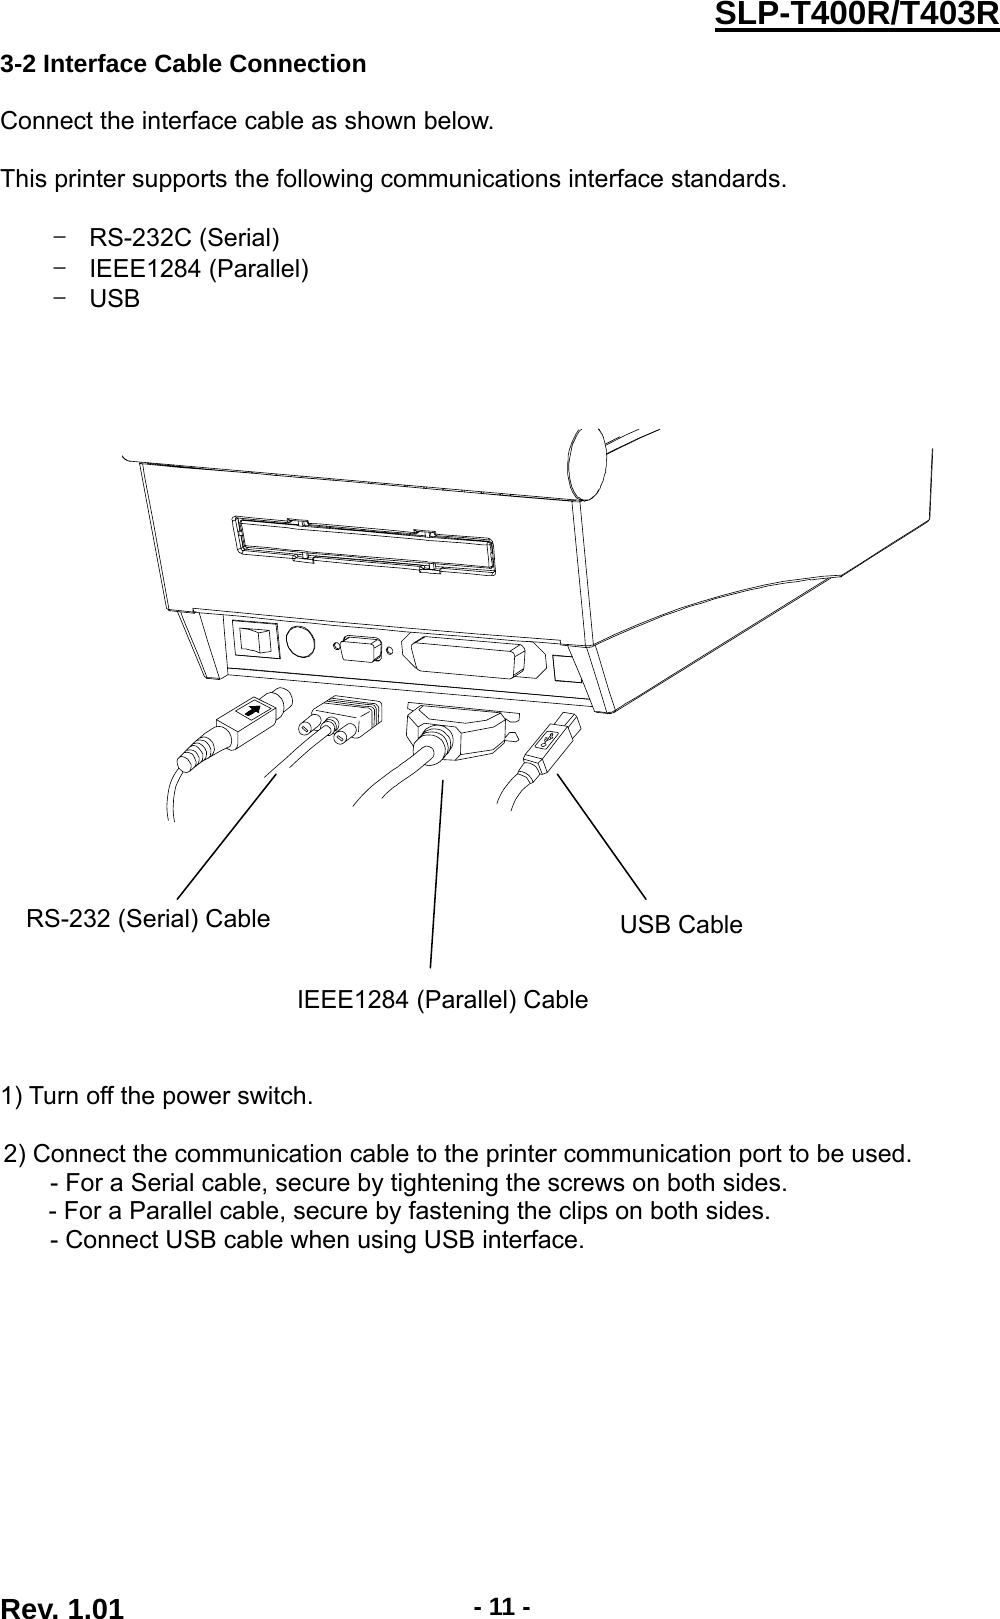  Rev. 1.01  - 11 -SLP-T400R/T403R3-2 Interface Cable Connection  Connect the interface cable as shown below.  This printer supports the following communications interface standards.  - RS-232C (Serial) - IEEE1284 (Parallel) - USB                    1) Turn off the power switch.  2) Connect the communication cable to the printer communication port to be used. - For a Serial cable, secure by tightening the screws on both sides. - For a Parallel cable, secure by fastening the clips on both sides. - Connect USB cable when using USB interface. USB Cable RS-232 (Serial) Cable IEEE1284 (Parallel) Cable 